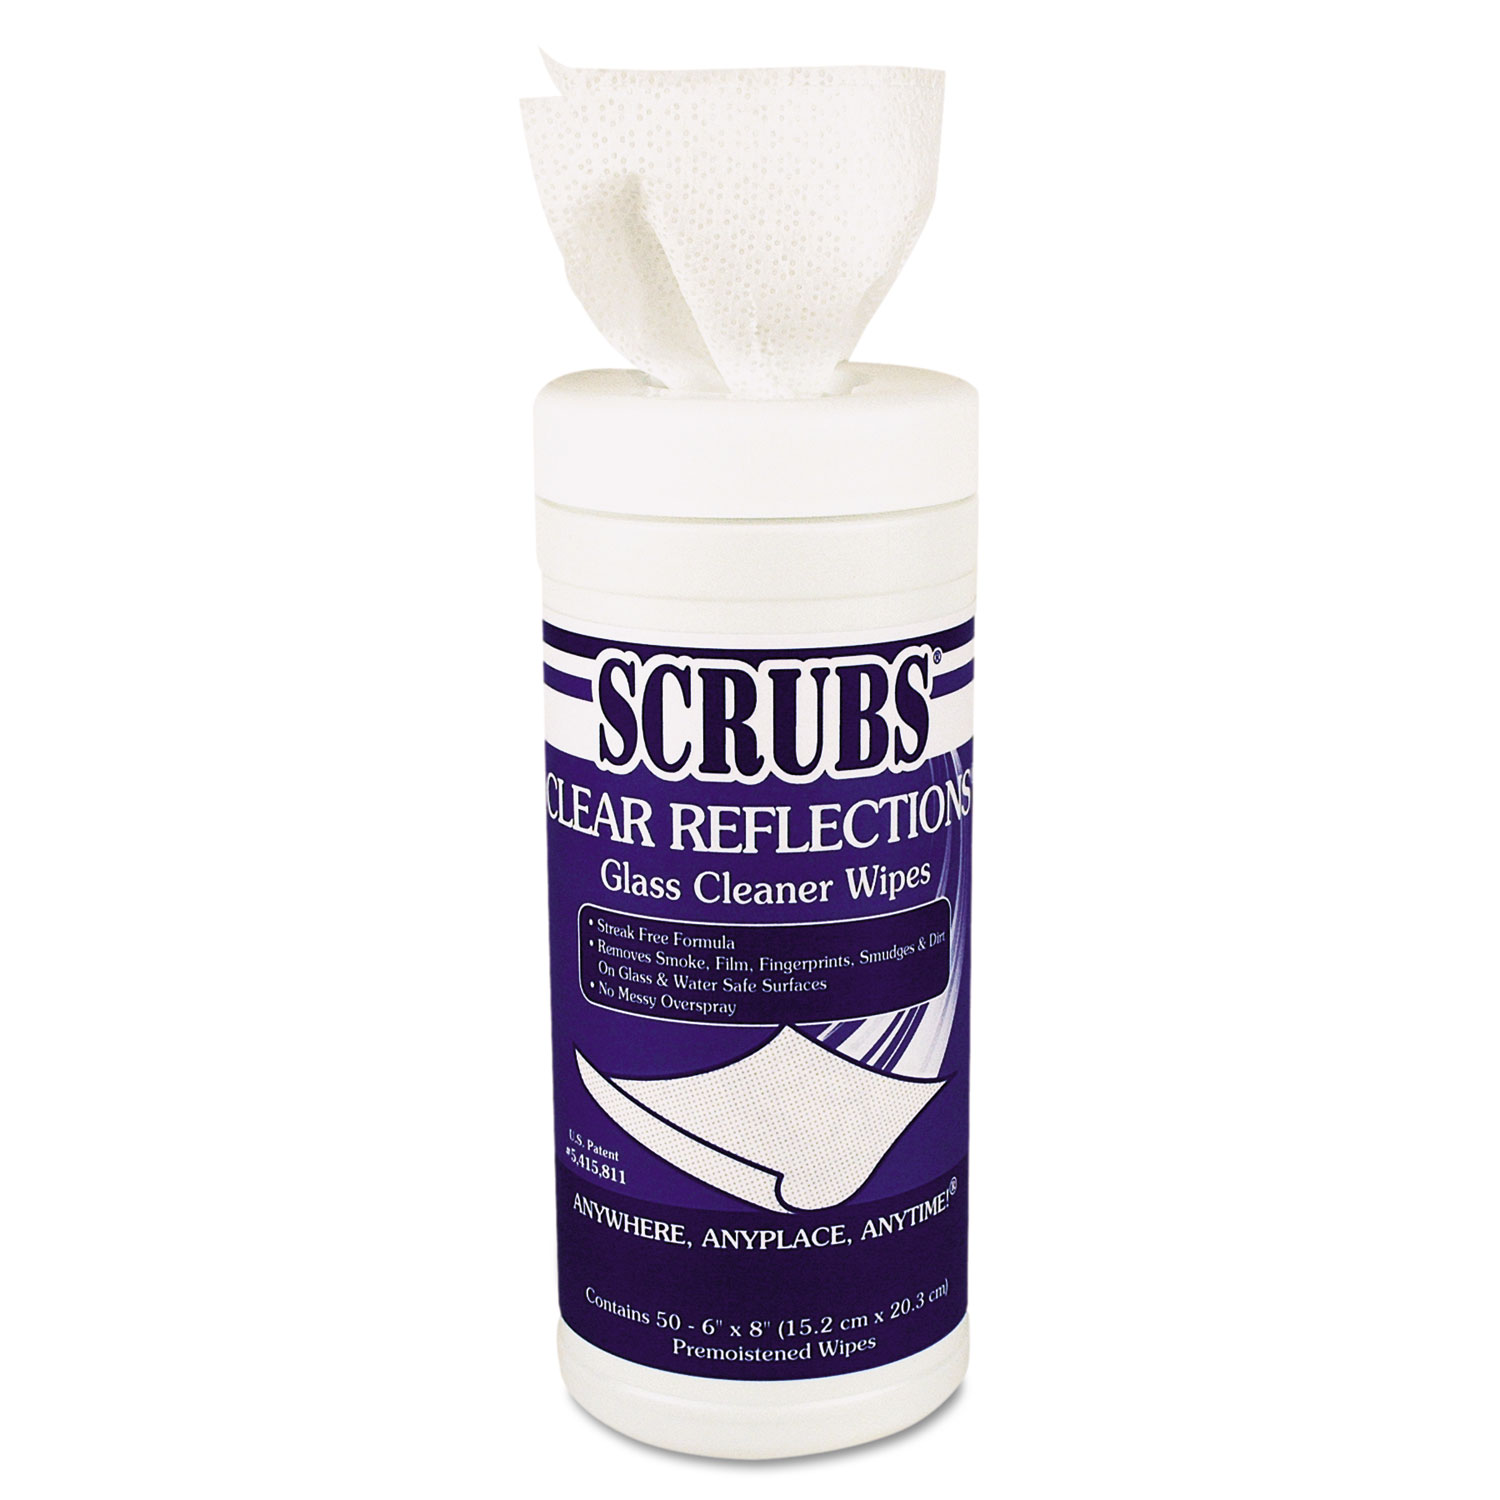  SCRUBS 98556 CLEAR REFLECTIONS Glass/Surface Wipes, 6 x 8, 50/Canister, 6 Cans/Carton (ITW98556CT) 